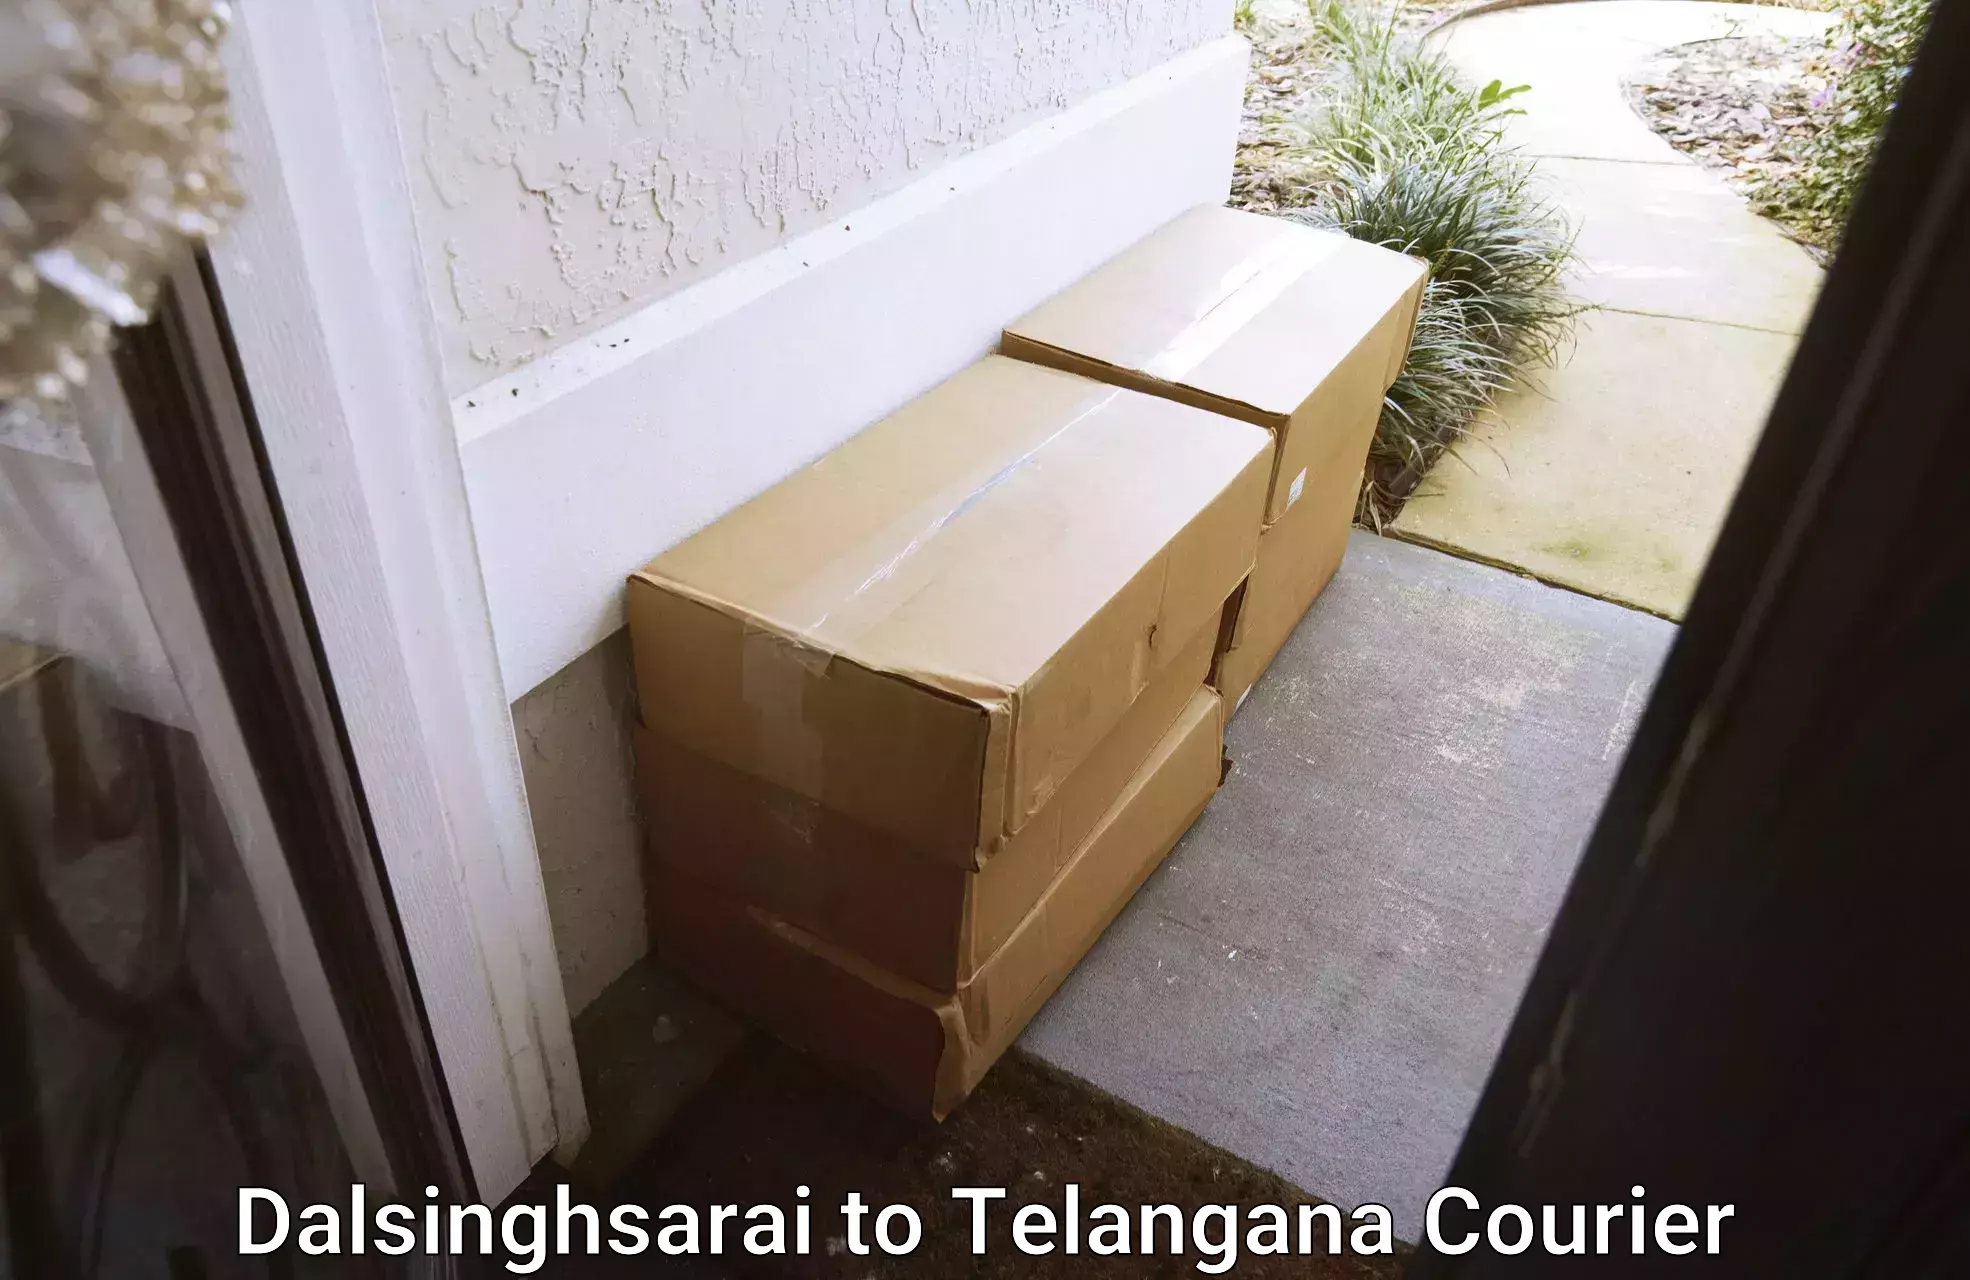 Home goods moving company Dalsinghsarai to Moinabad